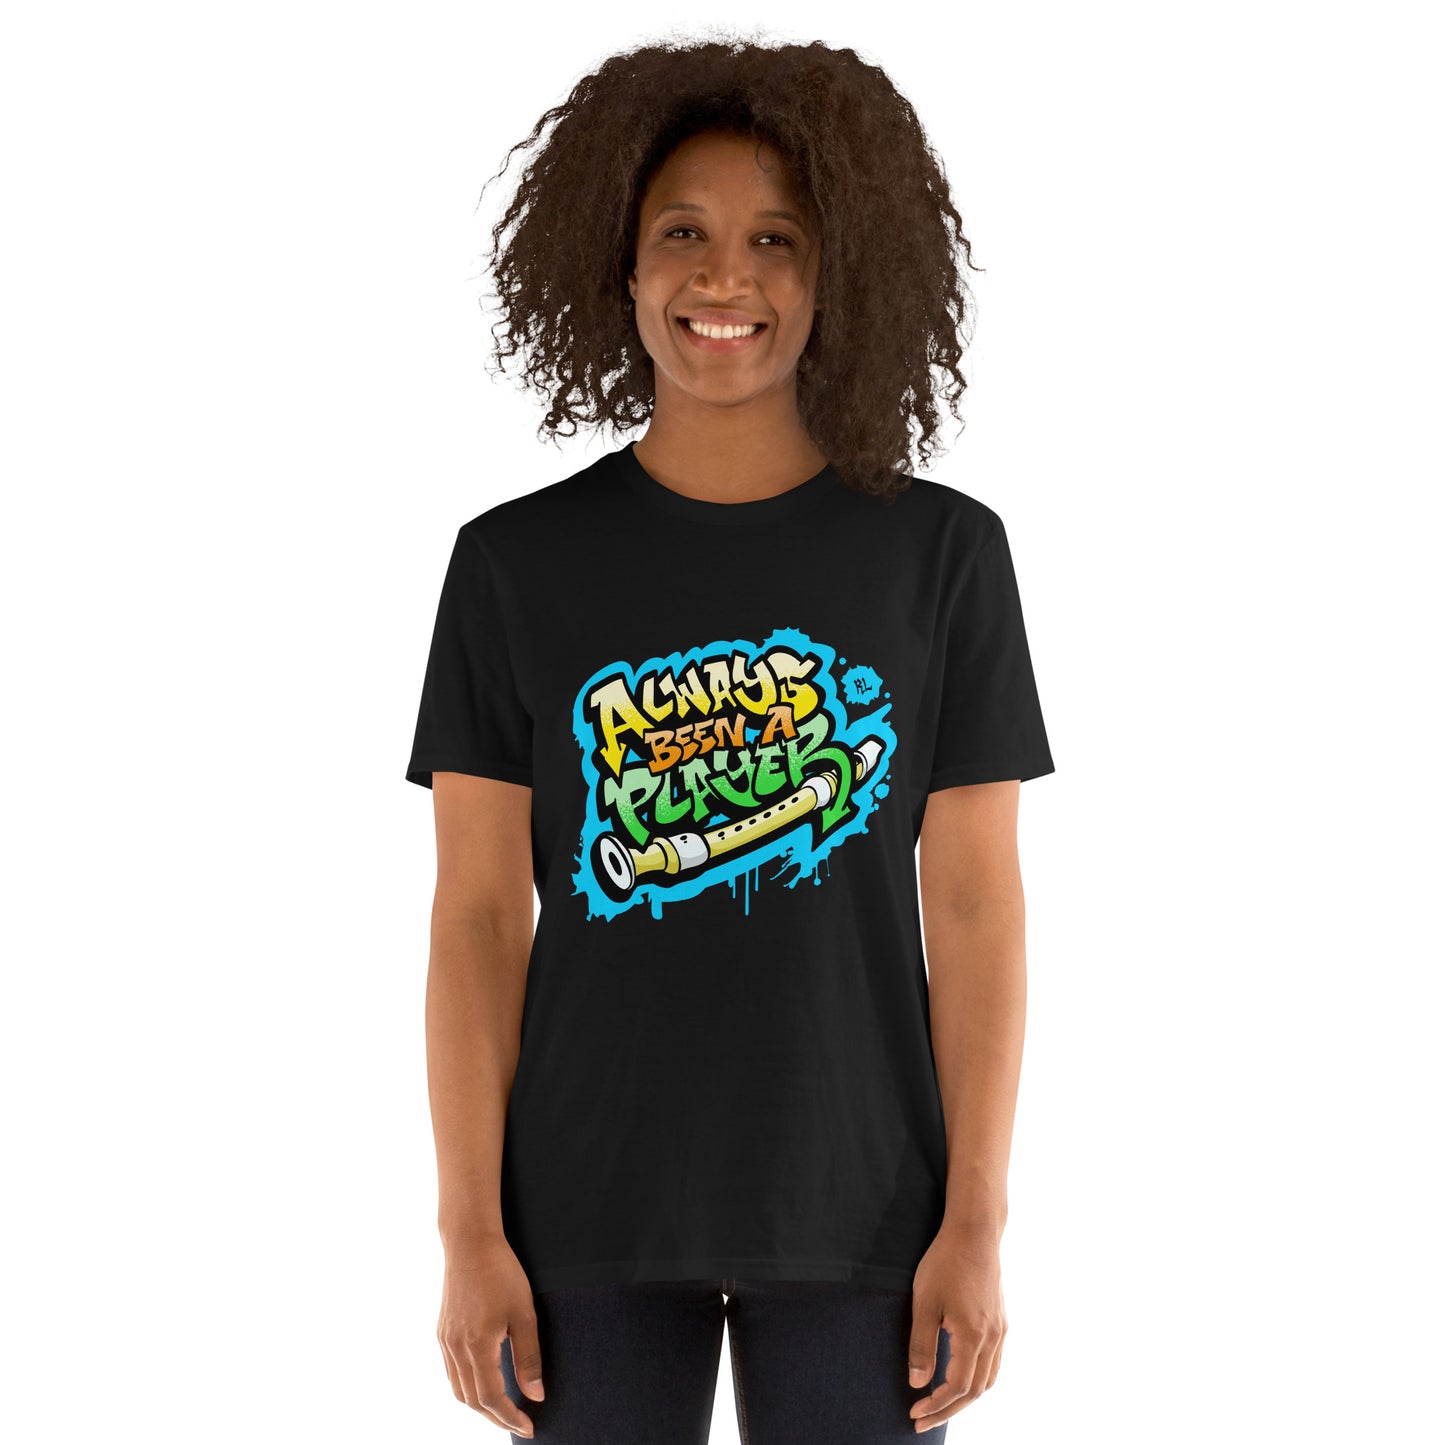 Richard Lindesay Always Been a Player Adult T-Shirt - BLUE BACKGROUND